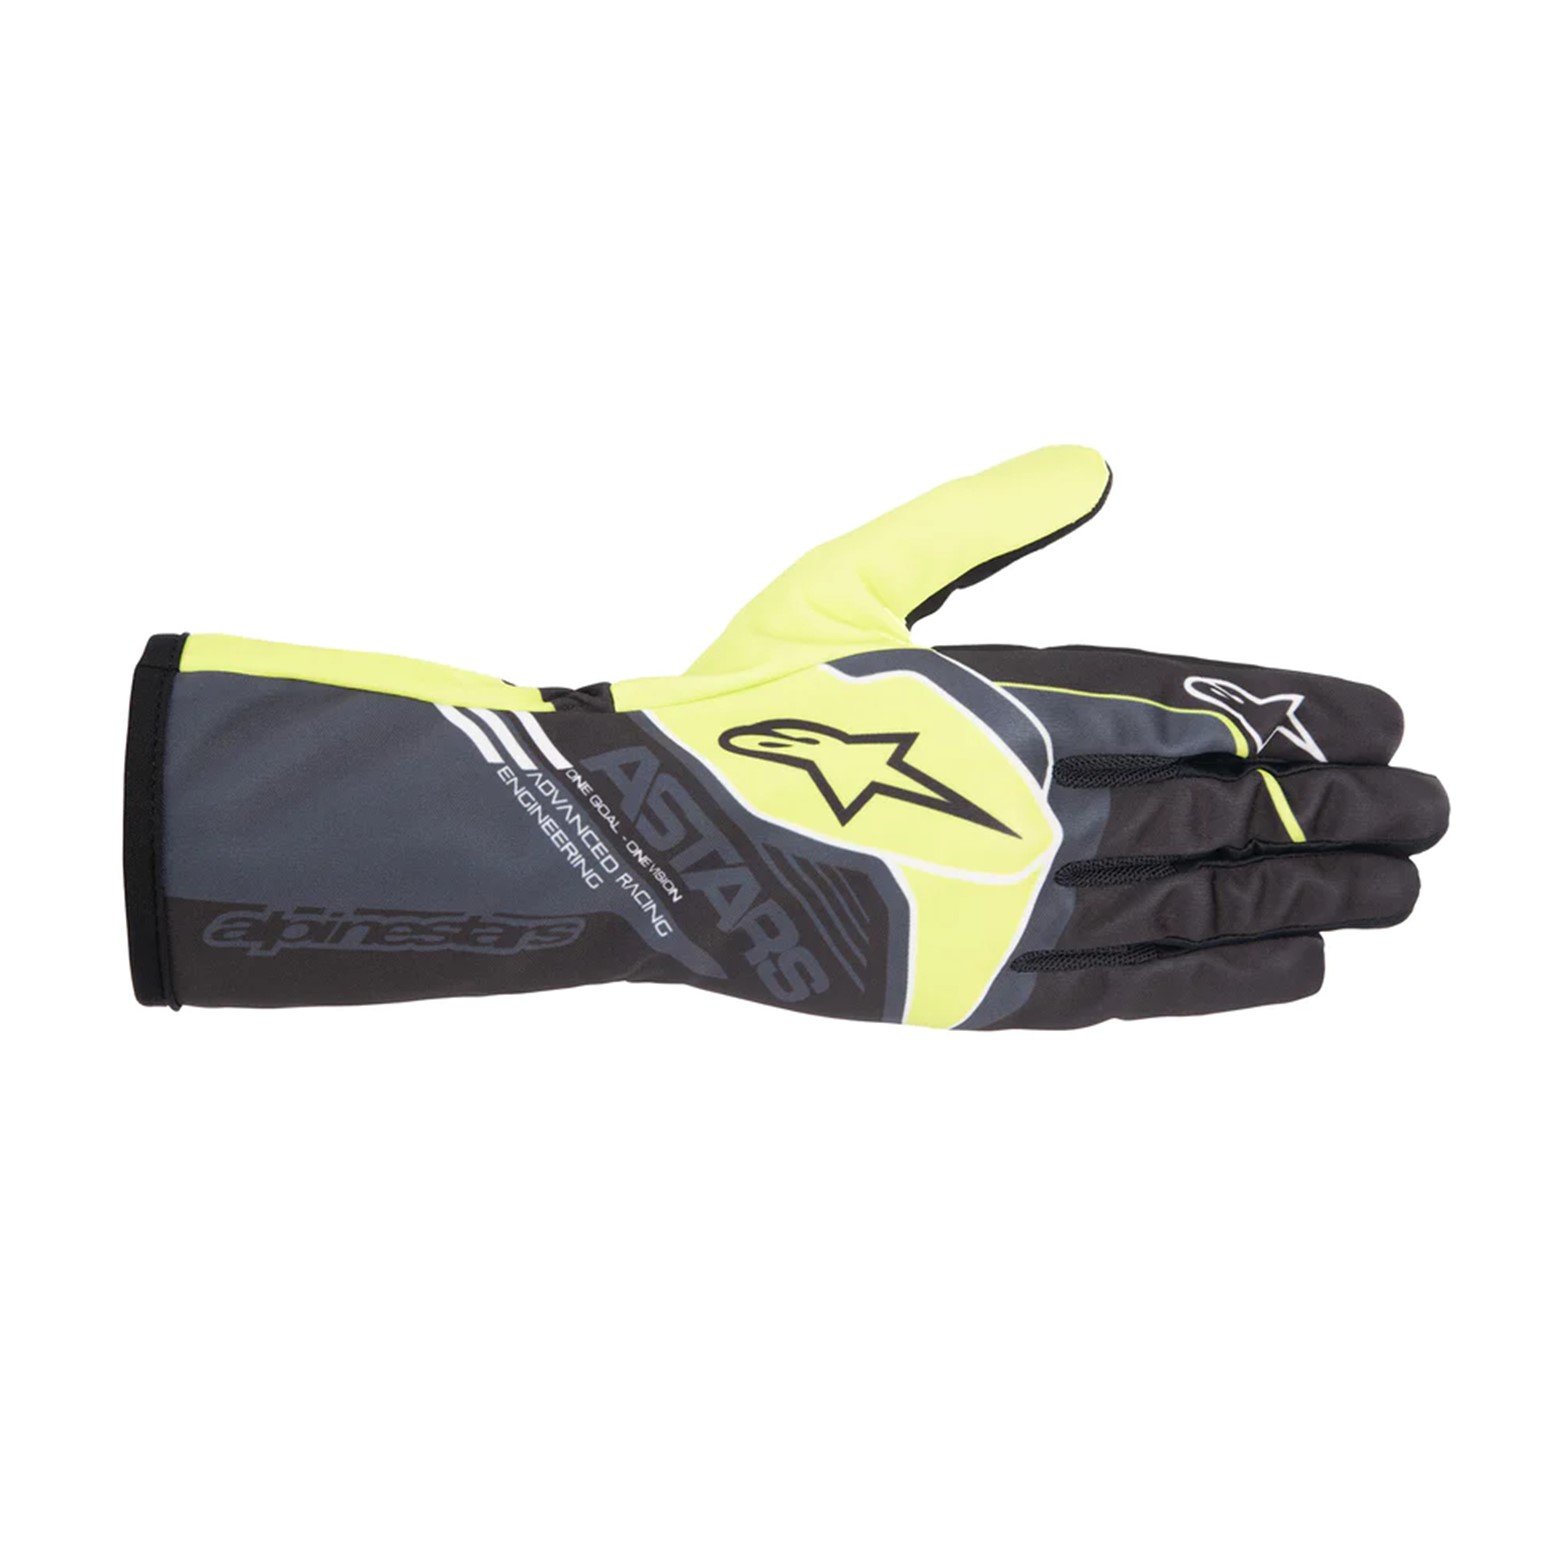 Kart Racing Gloves Arrow, Sparco Official